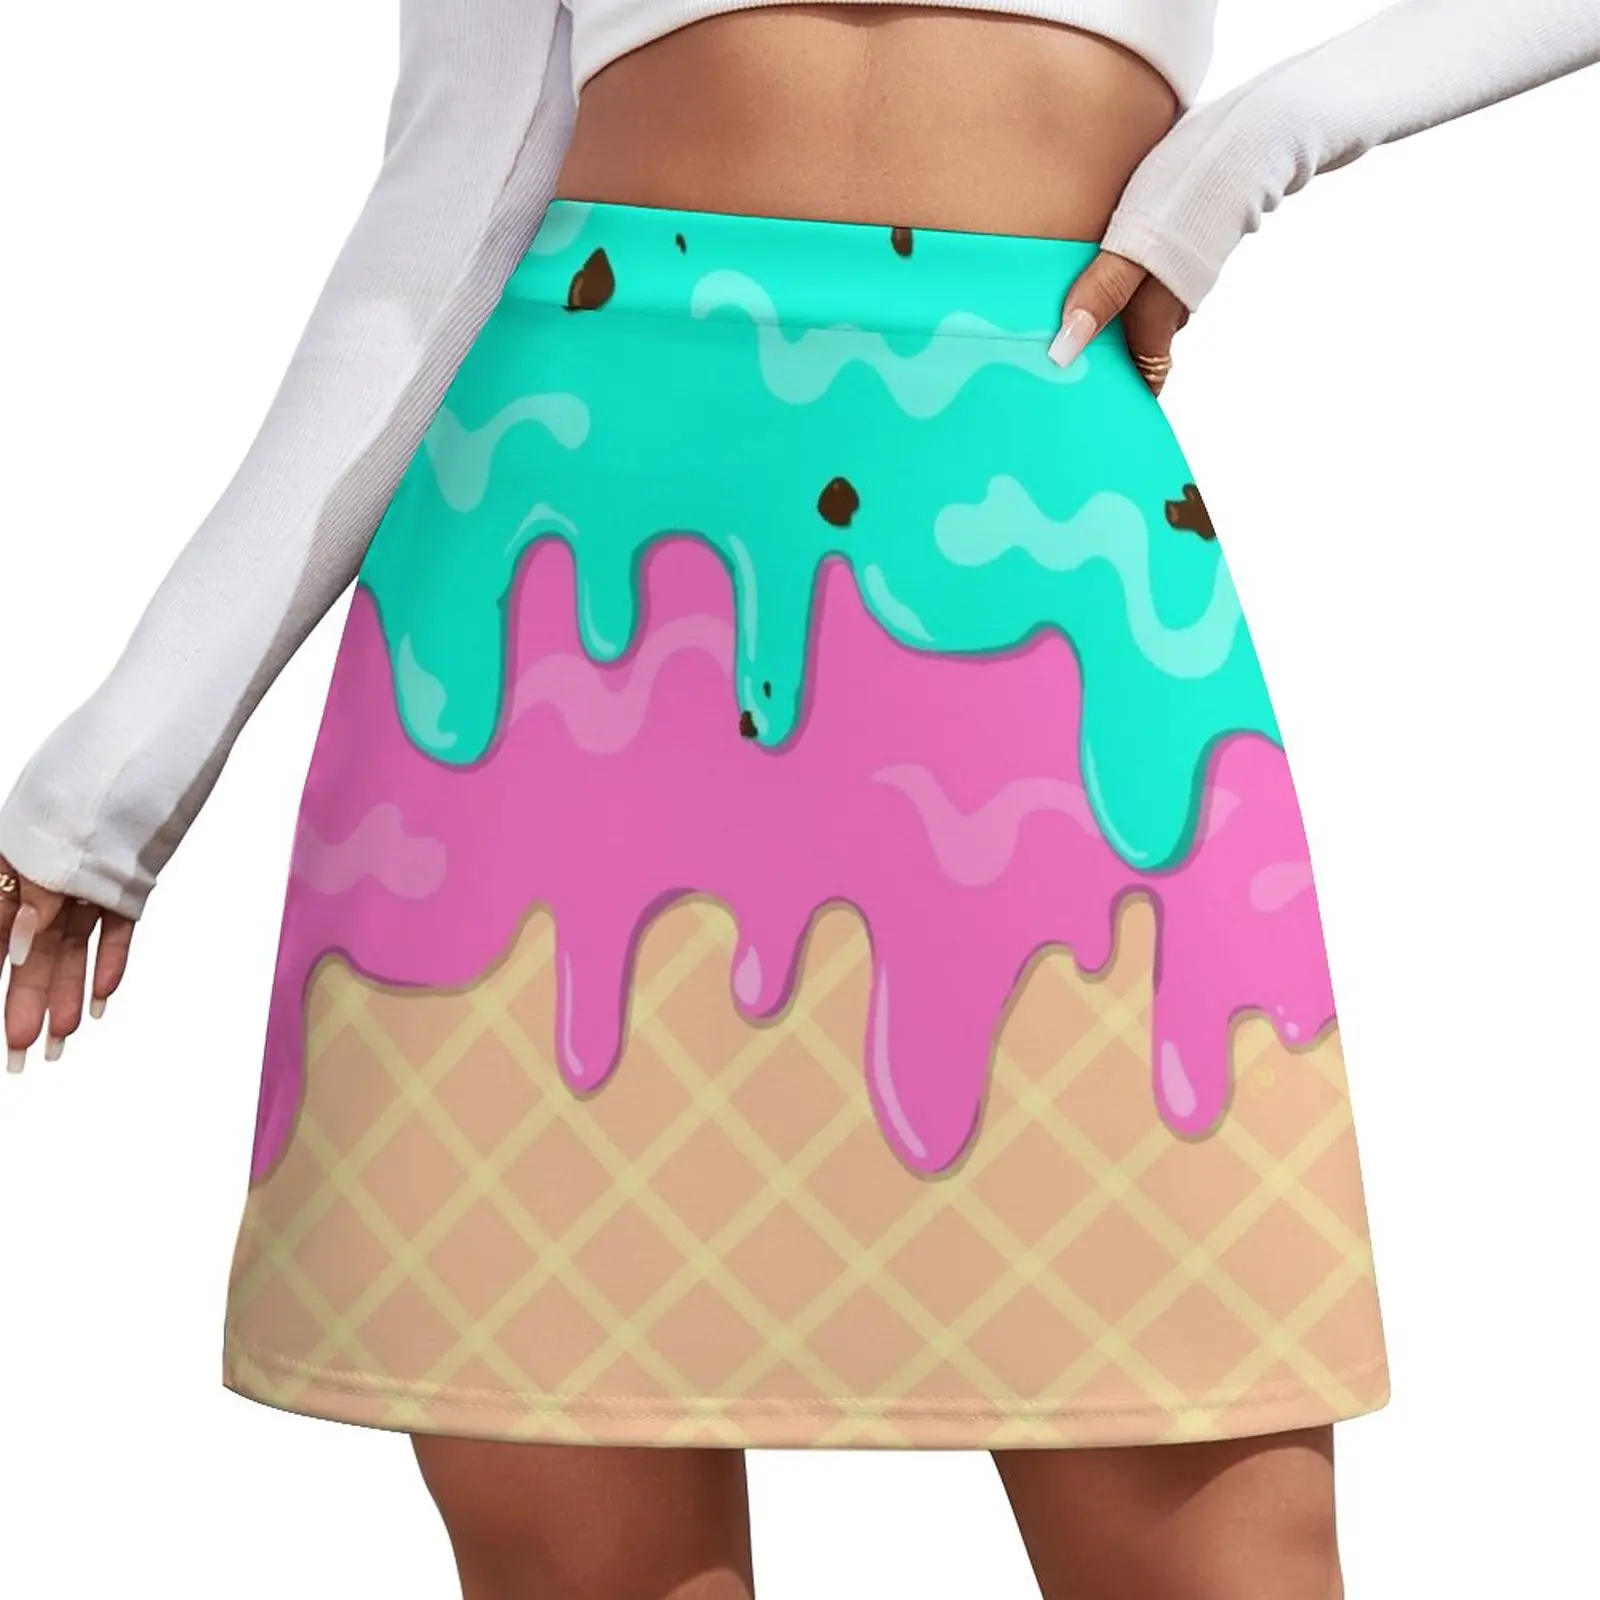 Melting Ice Cream in a Cone with mint chocolate and strawberry Ice Cream Mini Skirt skirts Dresses 24pcs kids simulation roadblocks toys mini road cone toy traffic cognitive toys